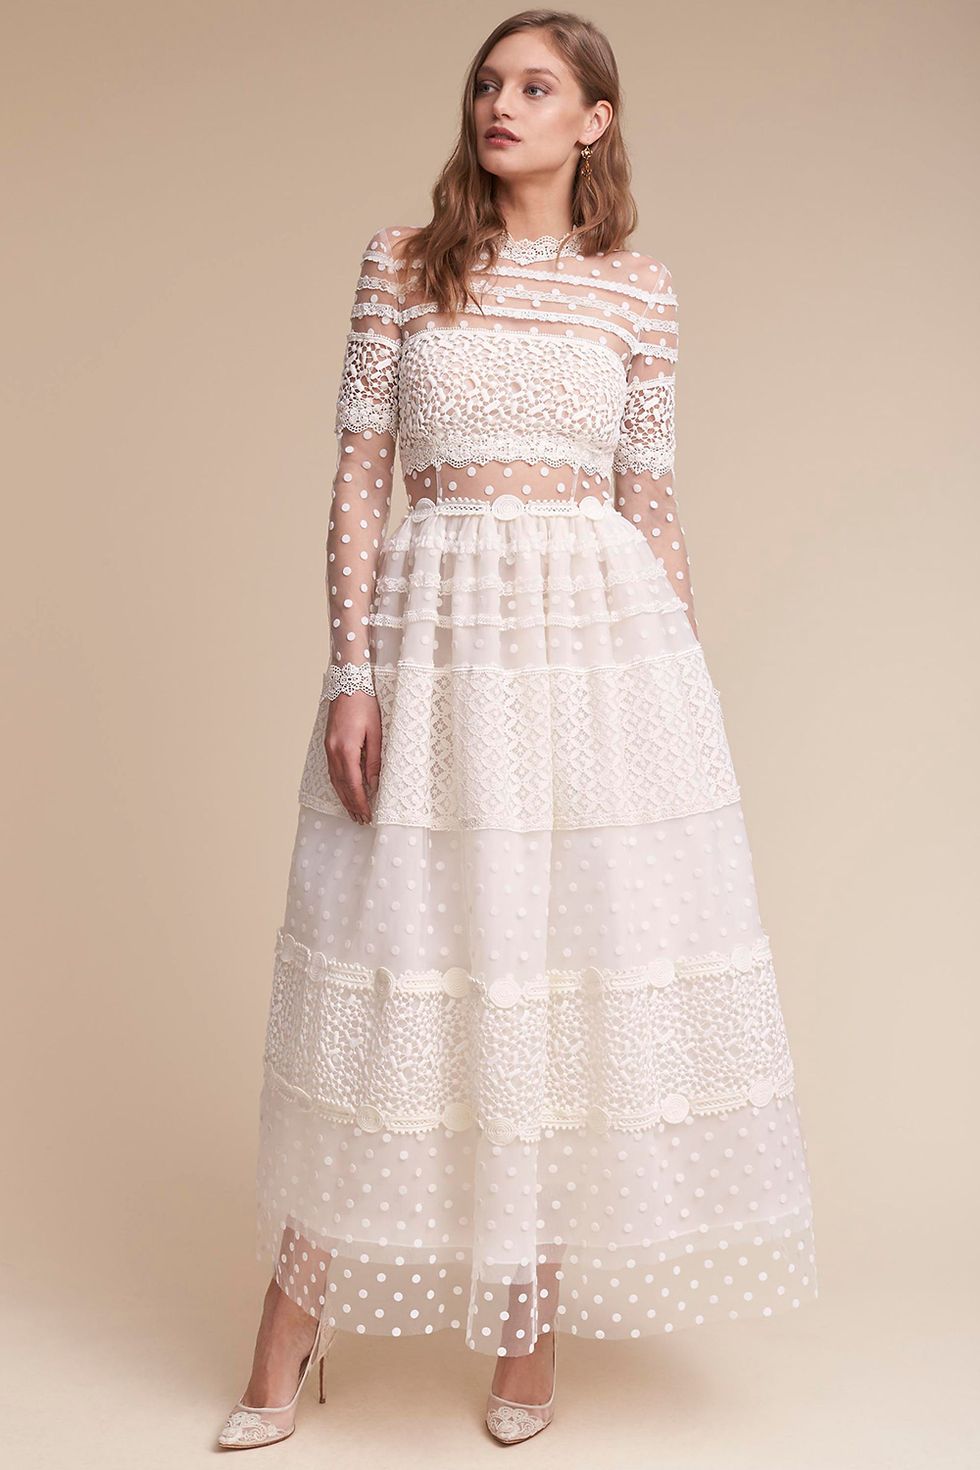 <p>This Swiss-dot meringue pouf&nbsp;of a dress is also called the&nbsp;"Keaton." So you have to get it.</p><p>$3,600, <a href="http://www.bhldn.com/shop-the-bride-wedding-dresses/keaton-gown/productOptionIDS/fbcaeb8b-b90b-4e9a-9313-32da085940dd" target="_blank" data-tracking-id="recirc-text-link">bhldn.com</a>.</p>